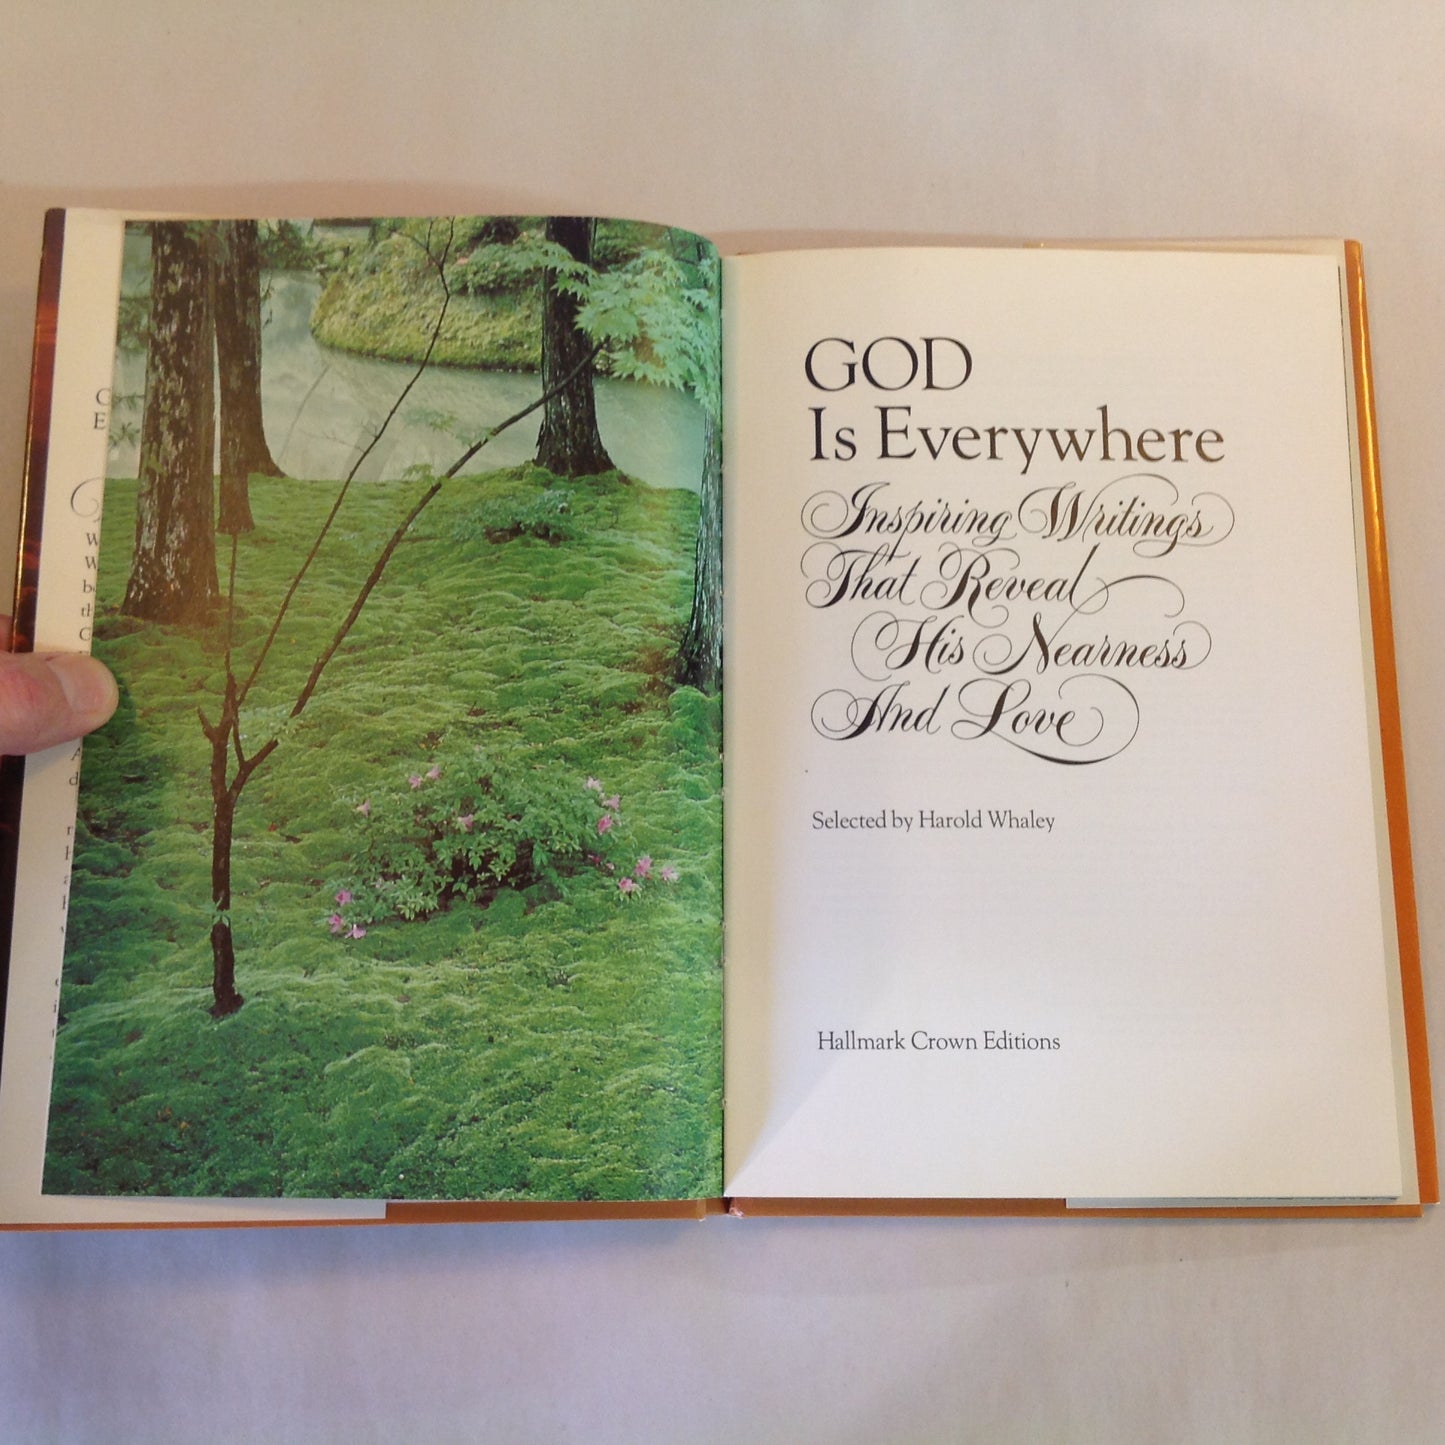 Vintage 1976 Hardcover God Is Everywhere: Inspiring Writings That Reveal His Nearness and Love Harold Whaley Hallmark Crown